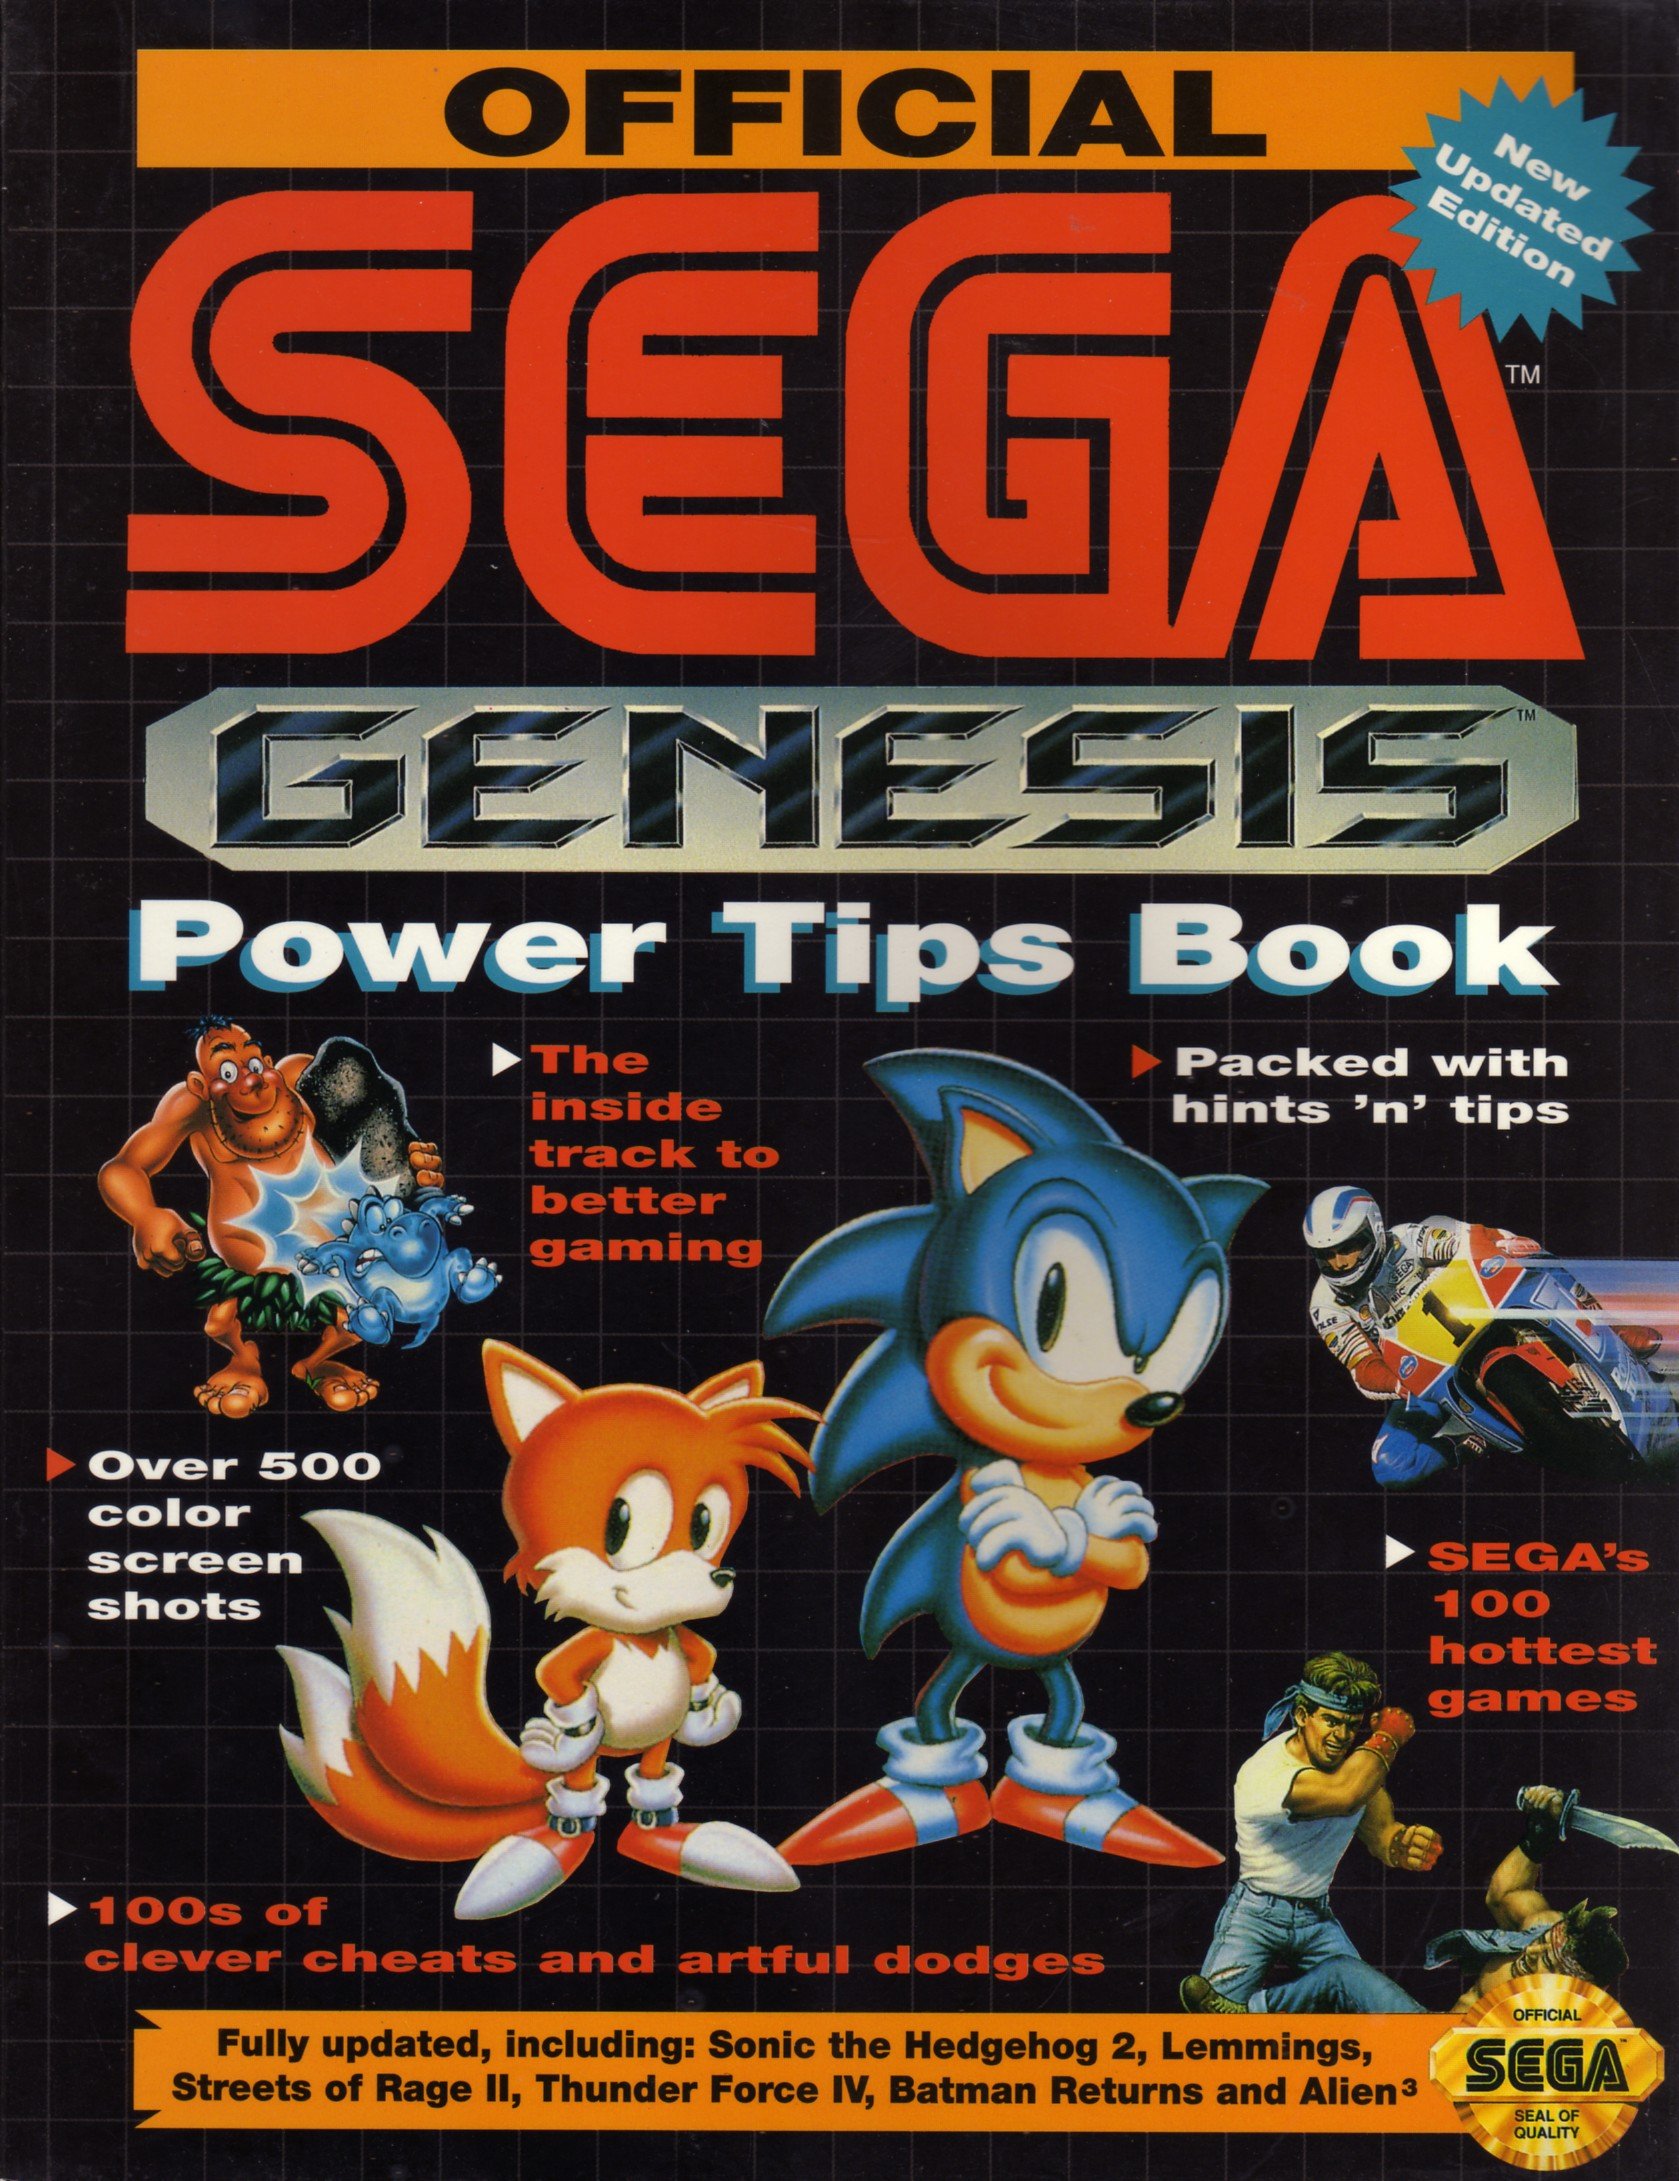 More information about "Official Sega Genesis Power Tips Book (New and Updated Edition)"